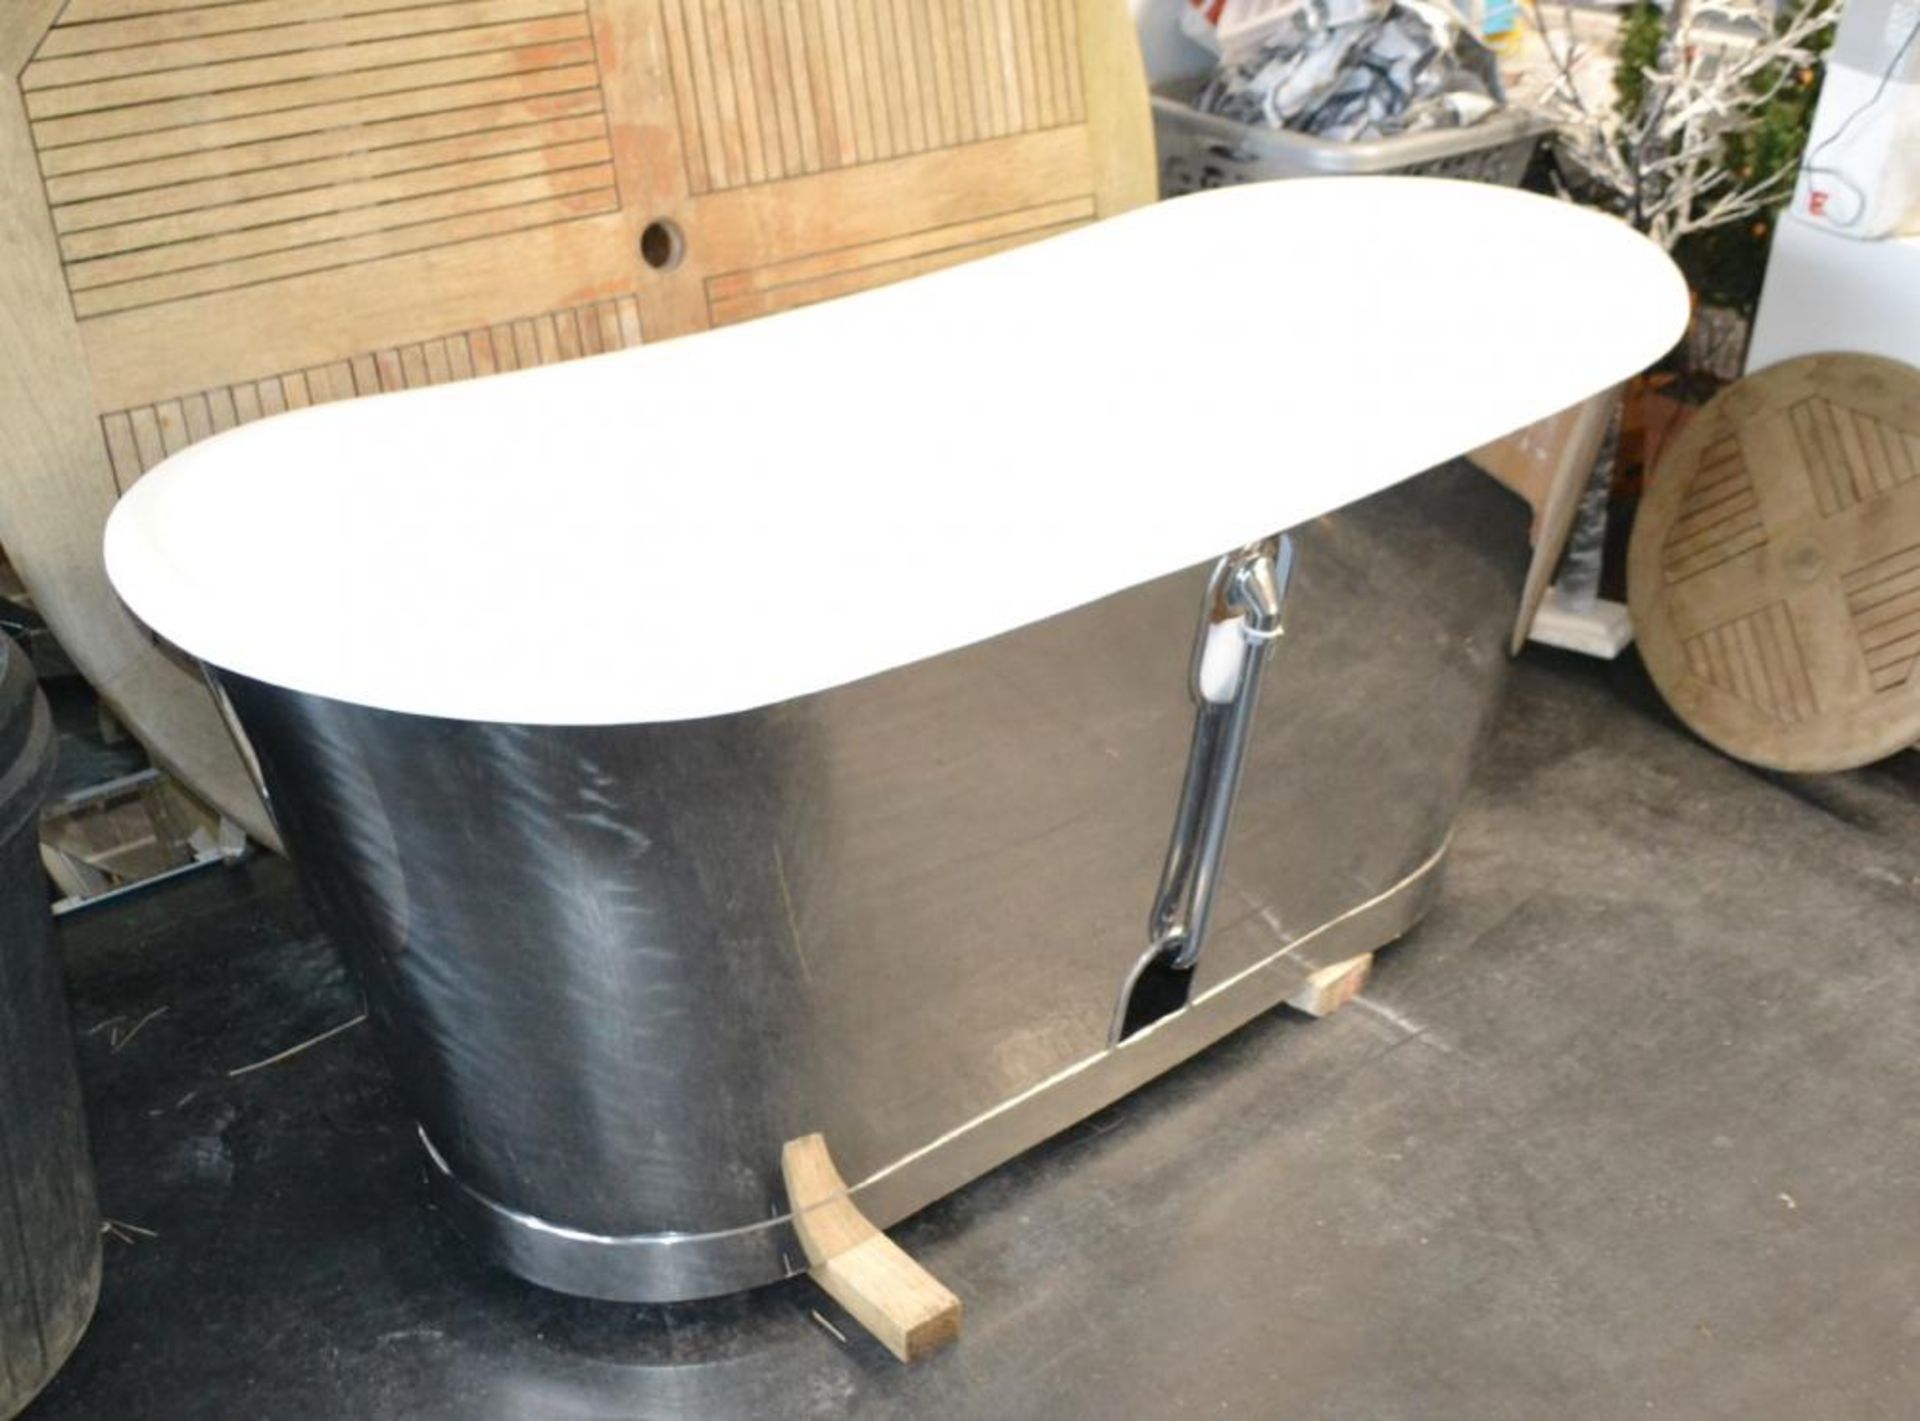 1 x Cast Iron Bath With Stainless Steel Exterior - CL439 - Location: Ilkey LS29 - Used In Good Condi - Image 2 of 8